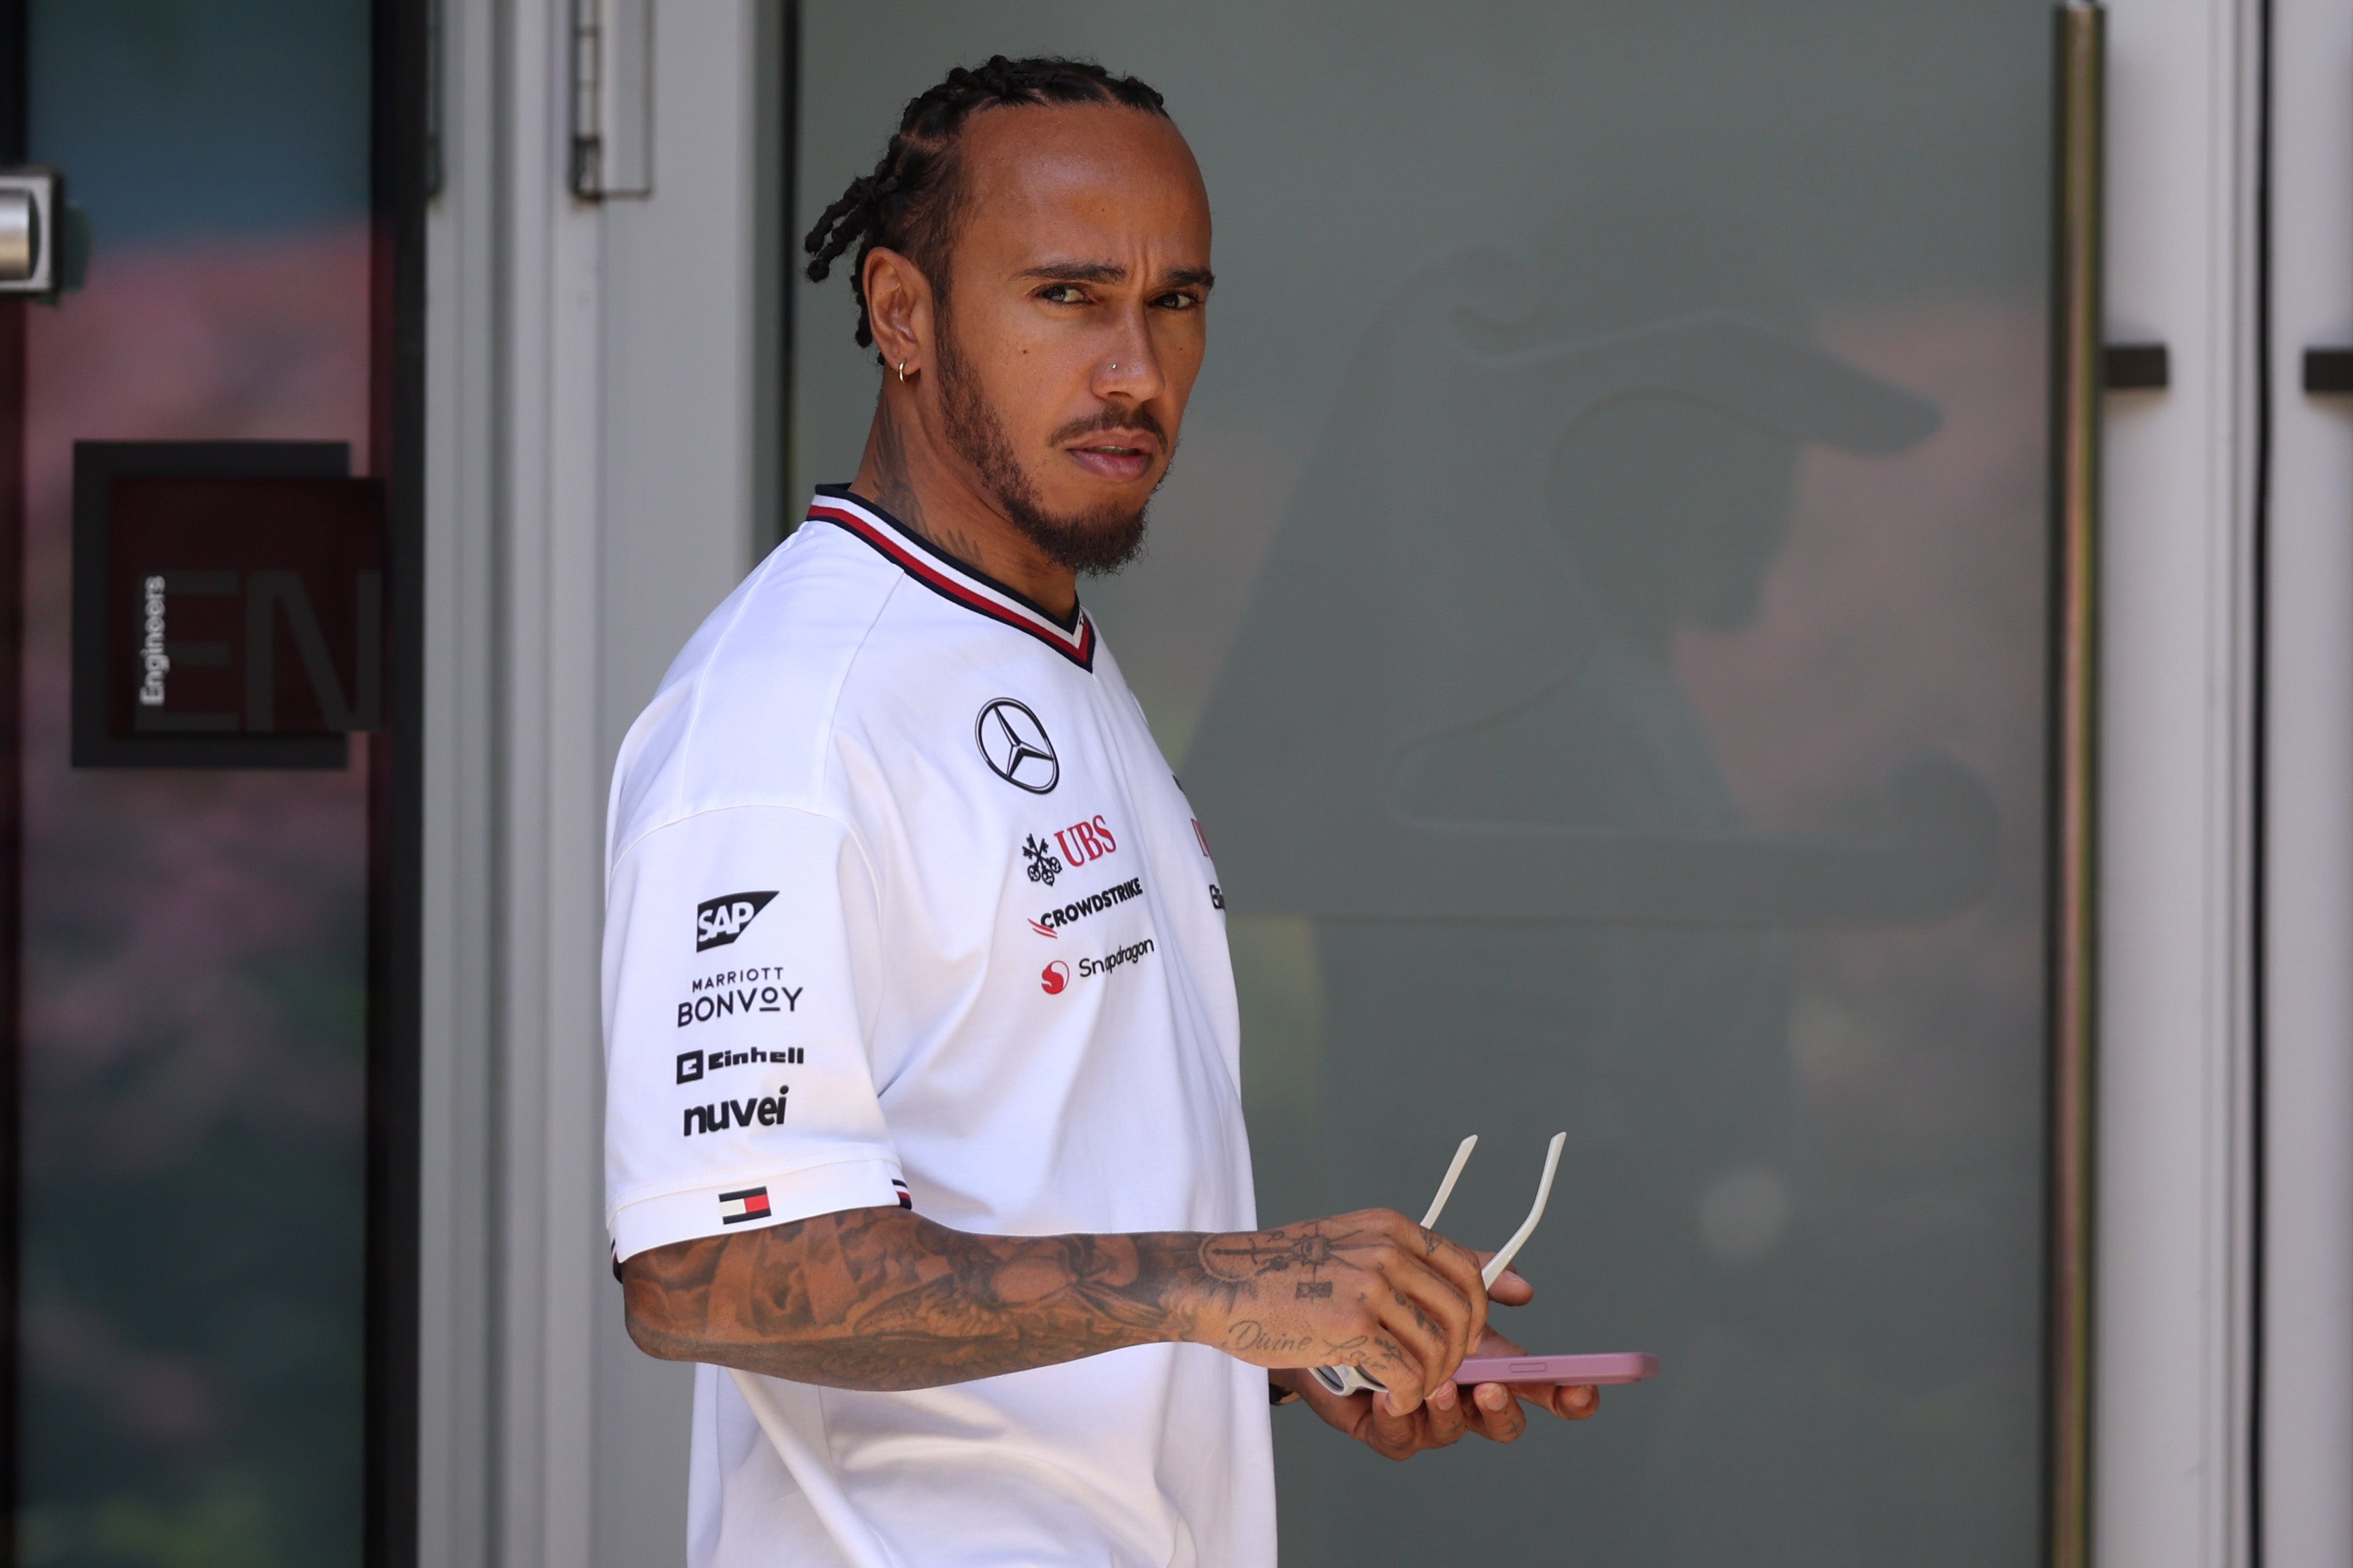 Lewis Hamilton will move from Mercedes to Ferrari next year